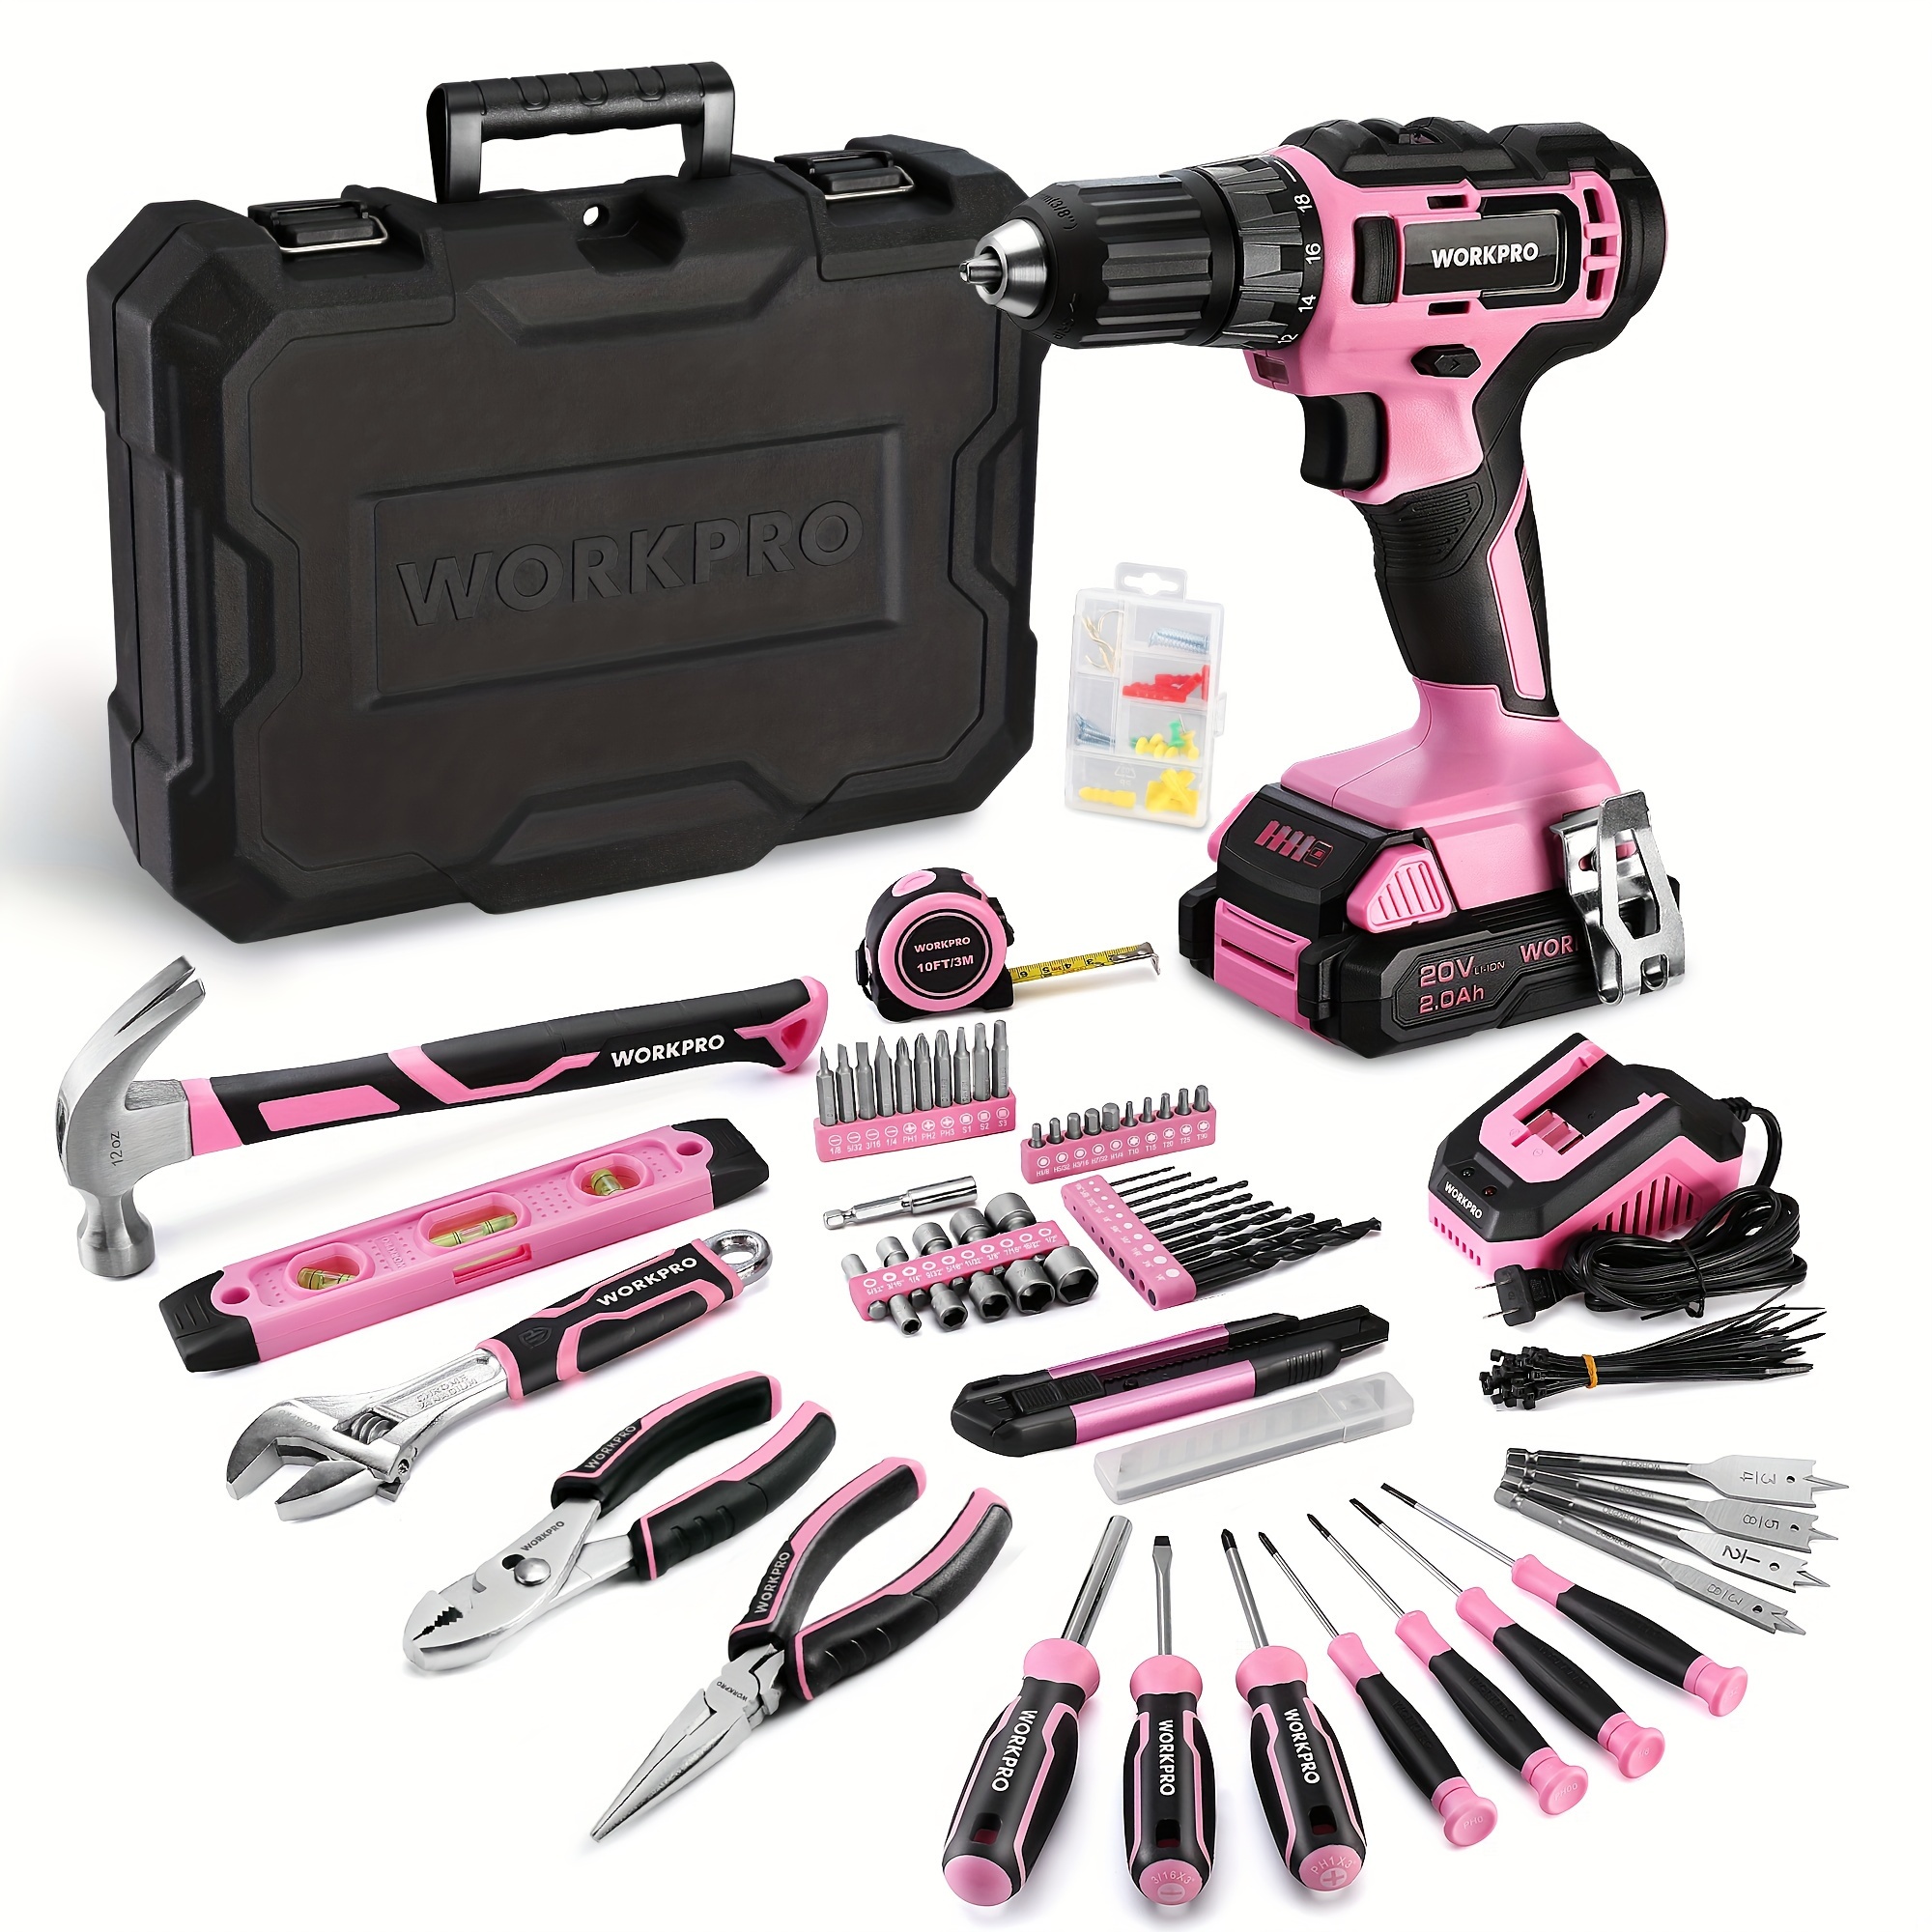 

Workpro 20v Pink Cordless Drill Driver And Home Tool Set, 141pcs Hand Tool Kit For Diy, Home Maintenance, 2.0 Ah Li-ion Battery, 1 Hour Fast Charger, And Tool Box Included -